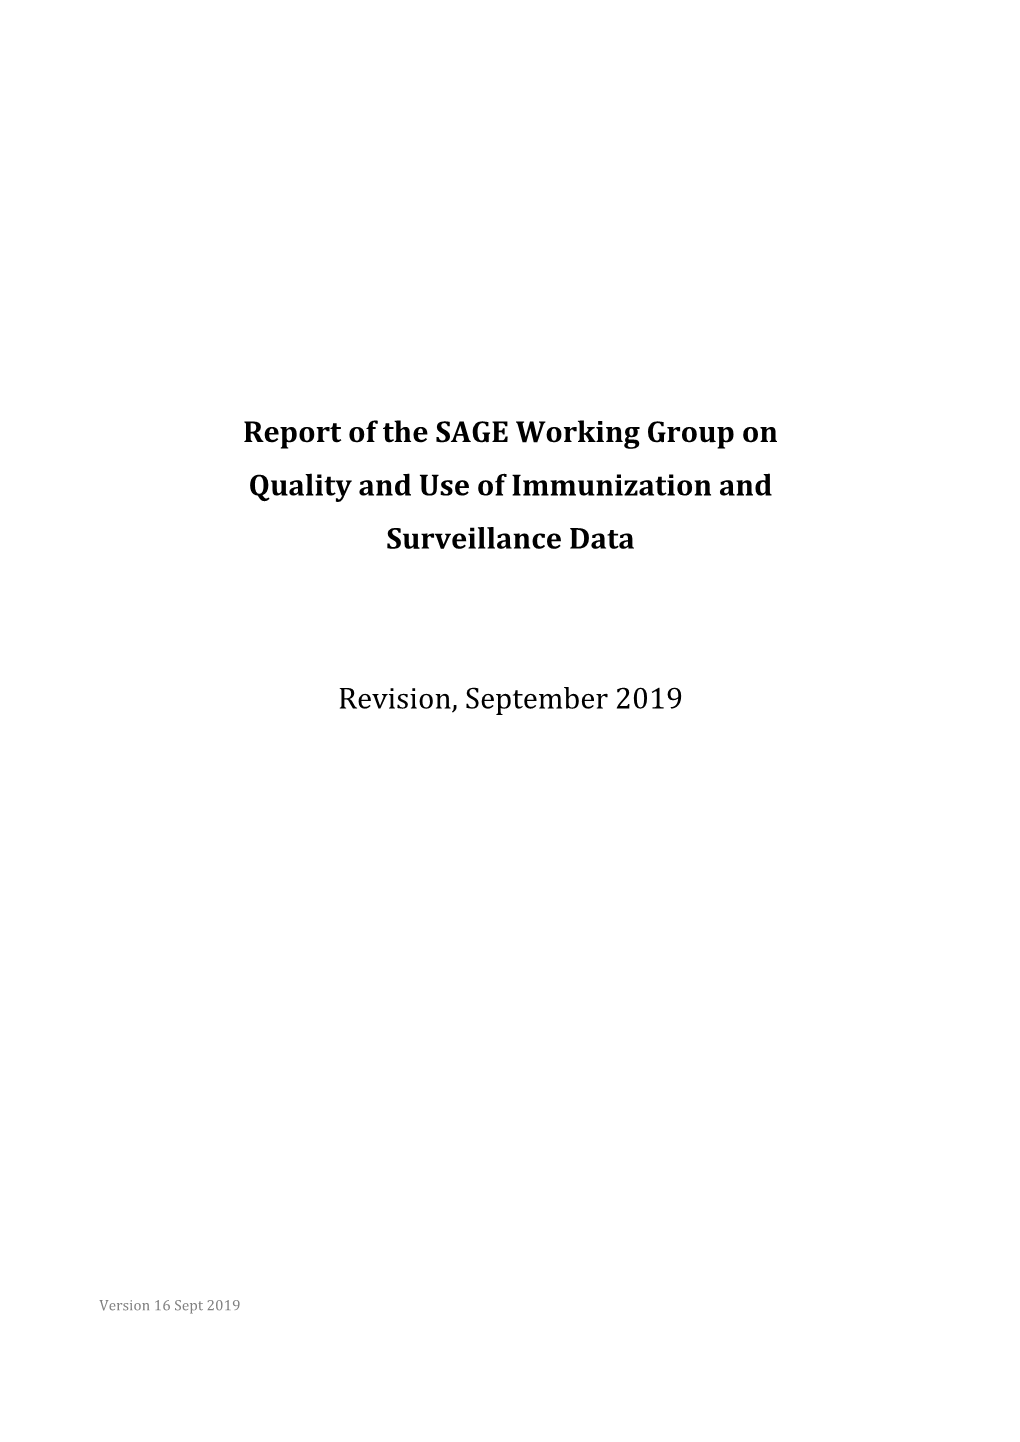 Report of the SAGE Working Group on Quality and Use of Immunization and Surveillance Data